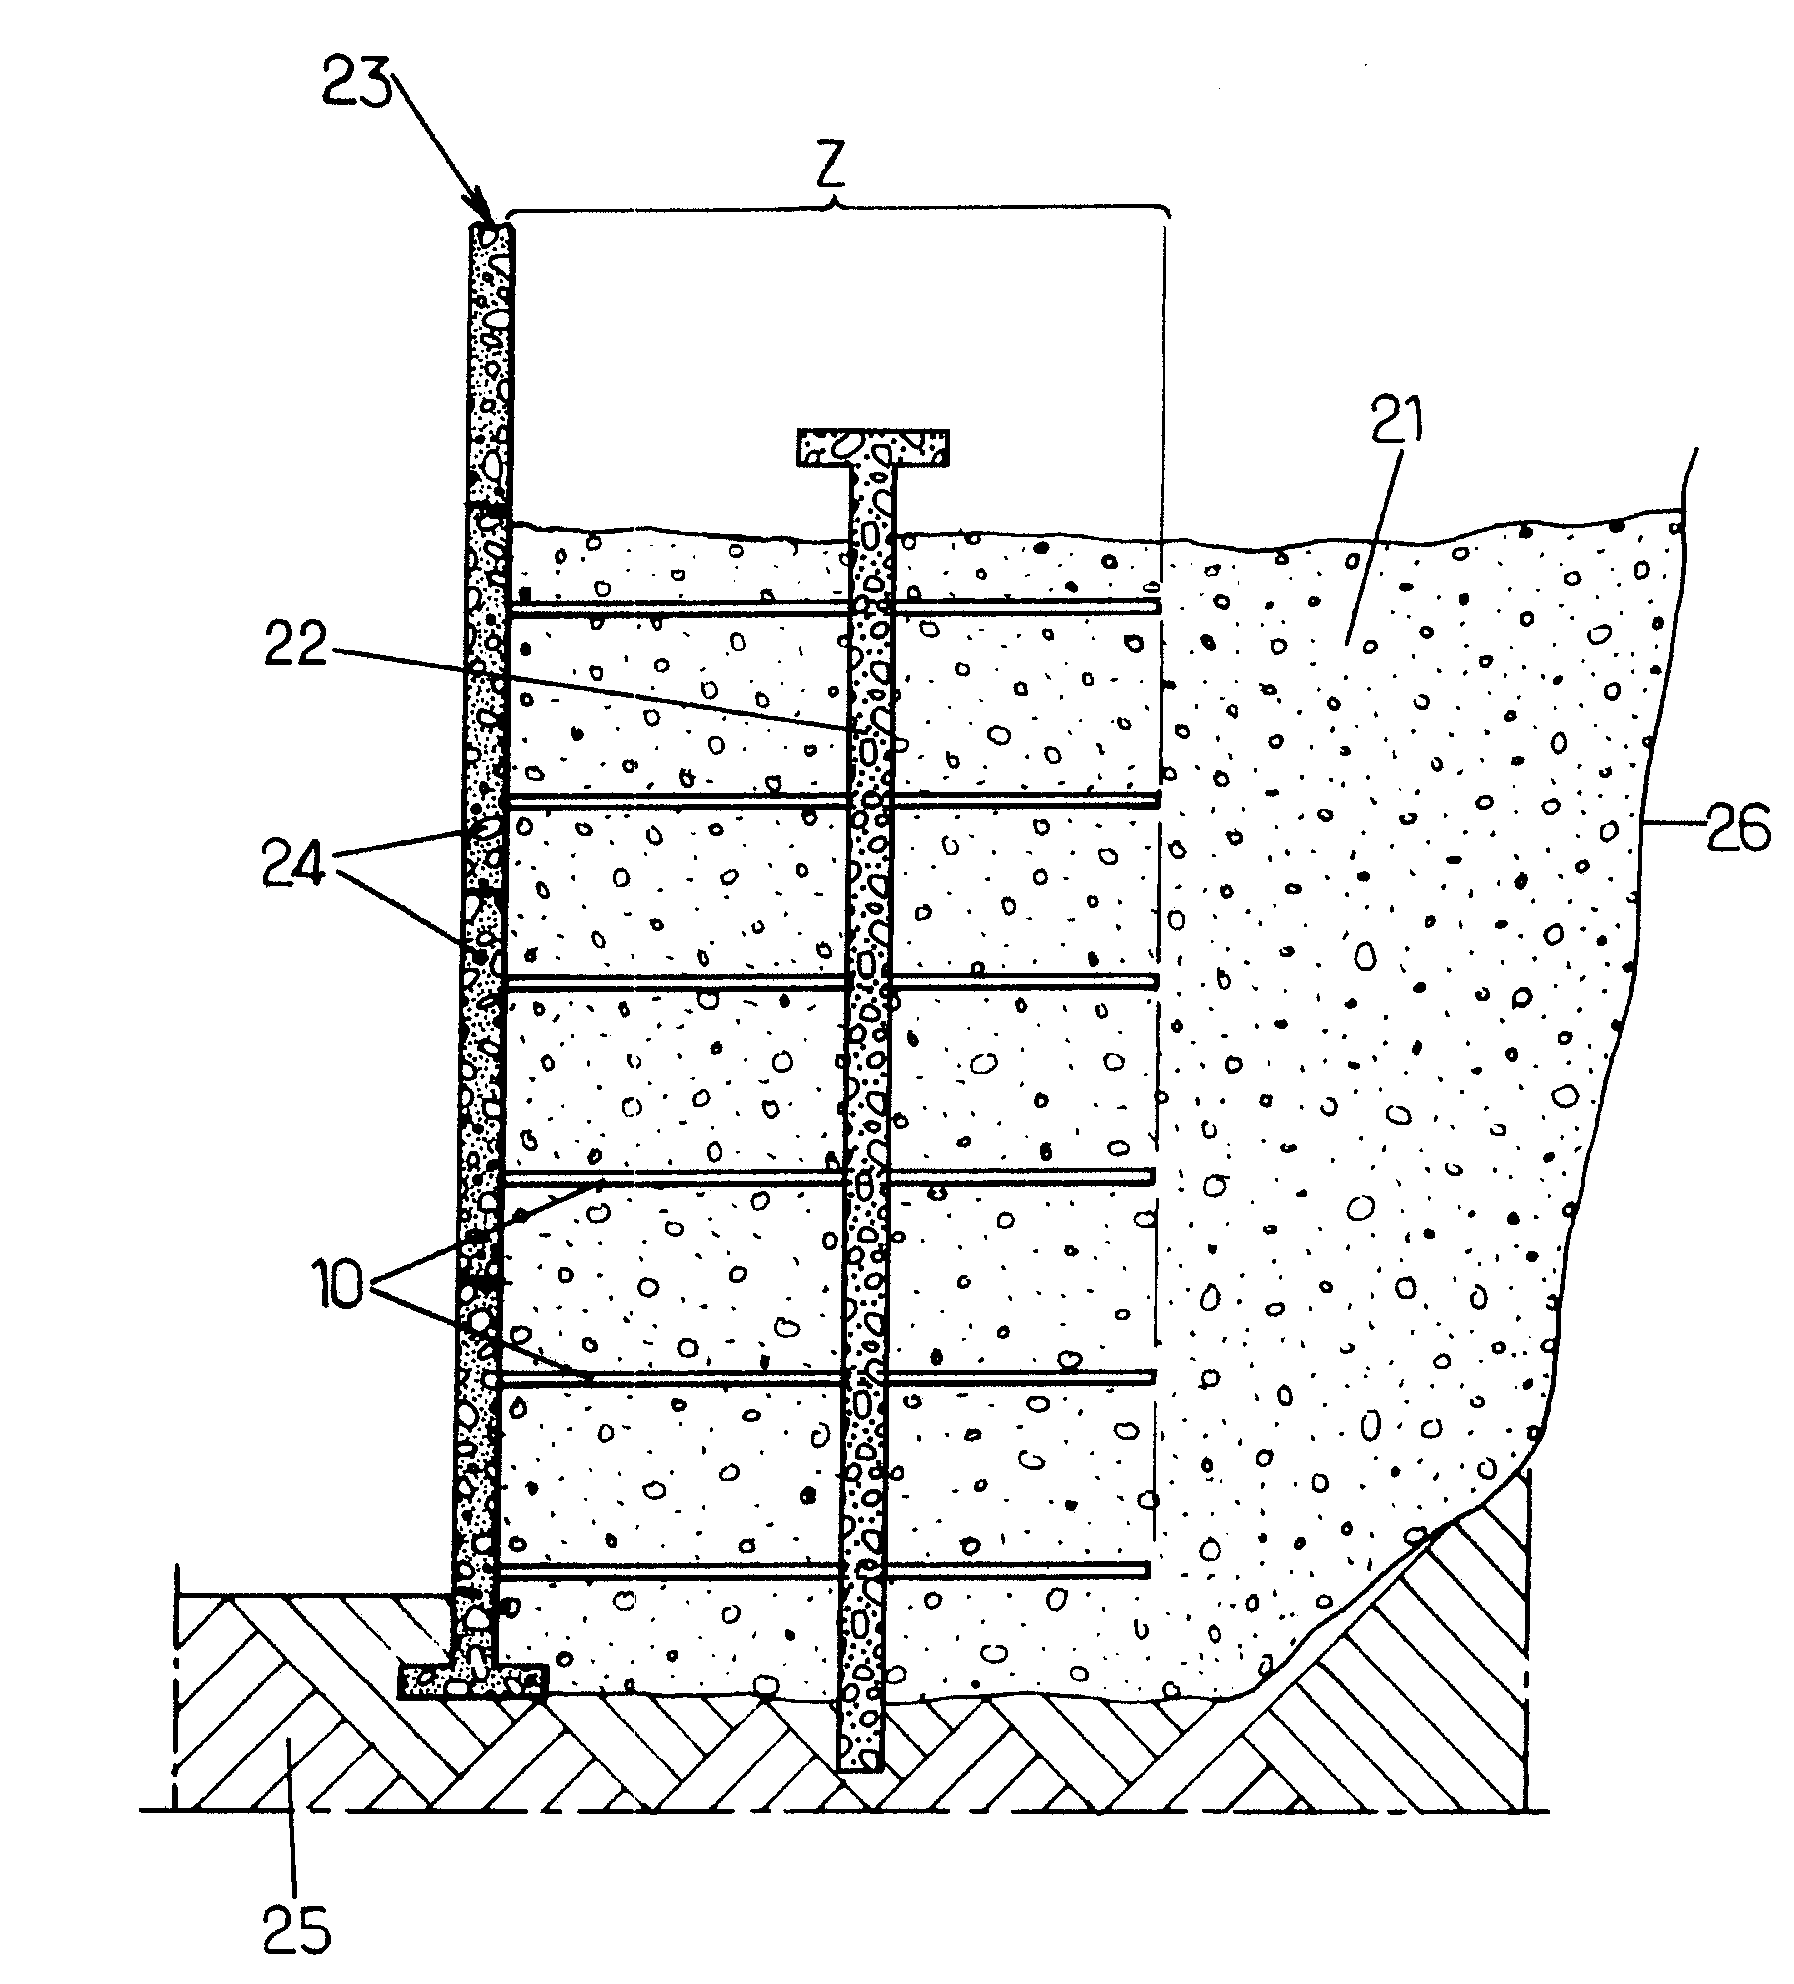 Stabilizing Strip Intended for Use in Reinforced Earth Structures